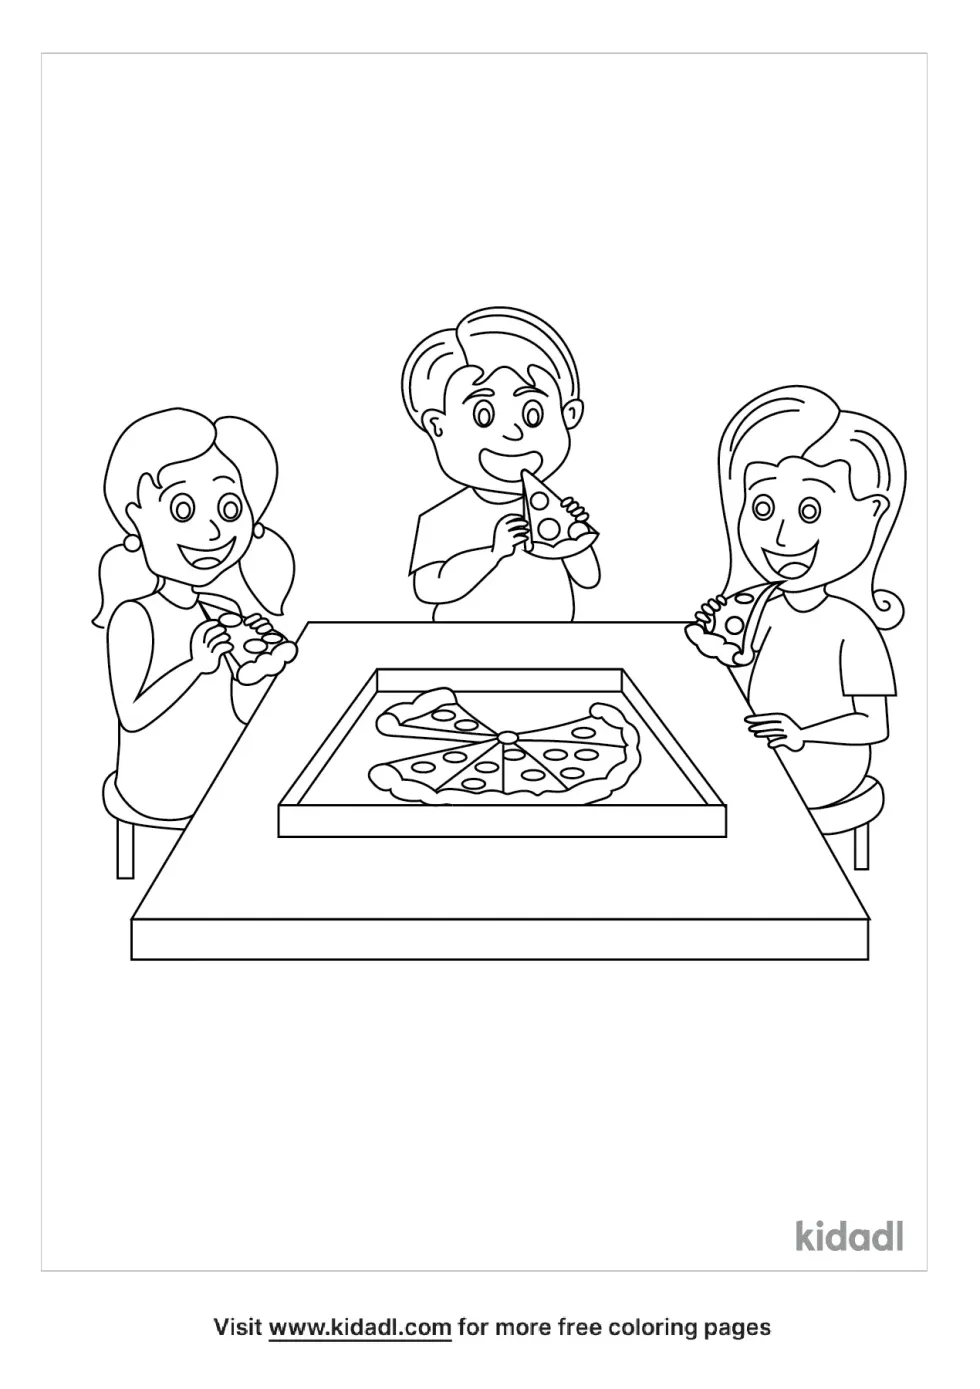 We All Sharing Food Coloring Page